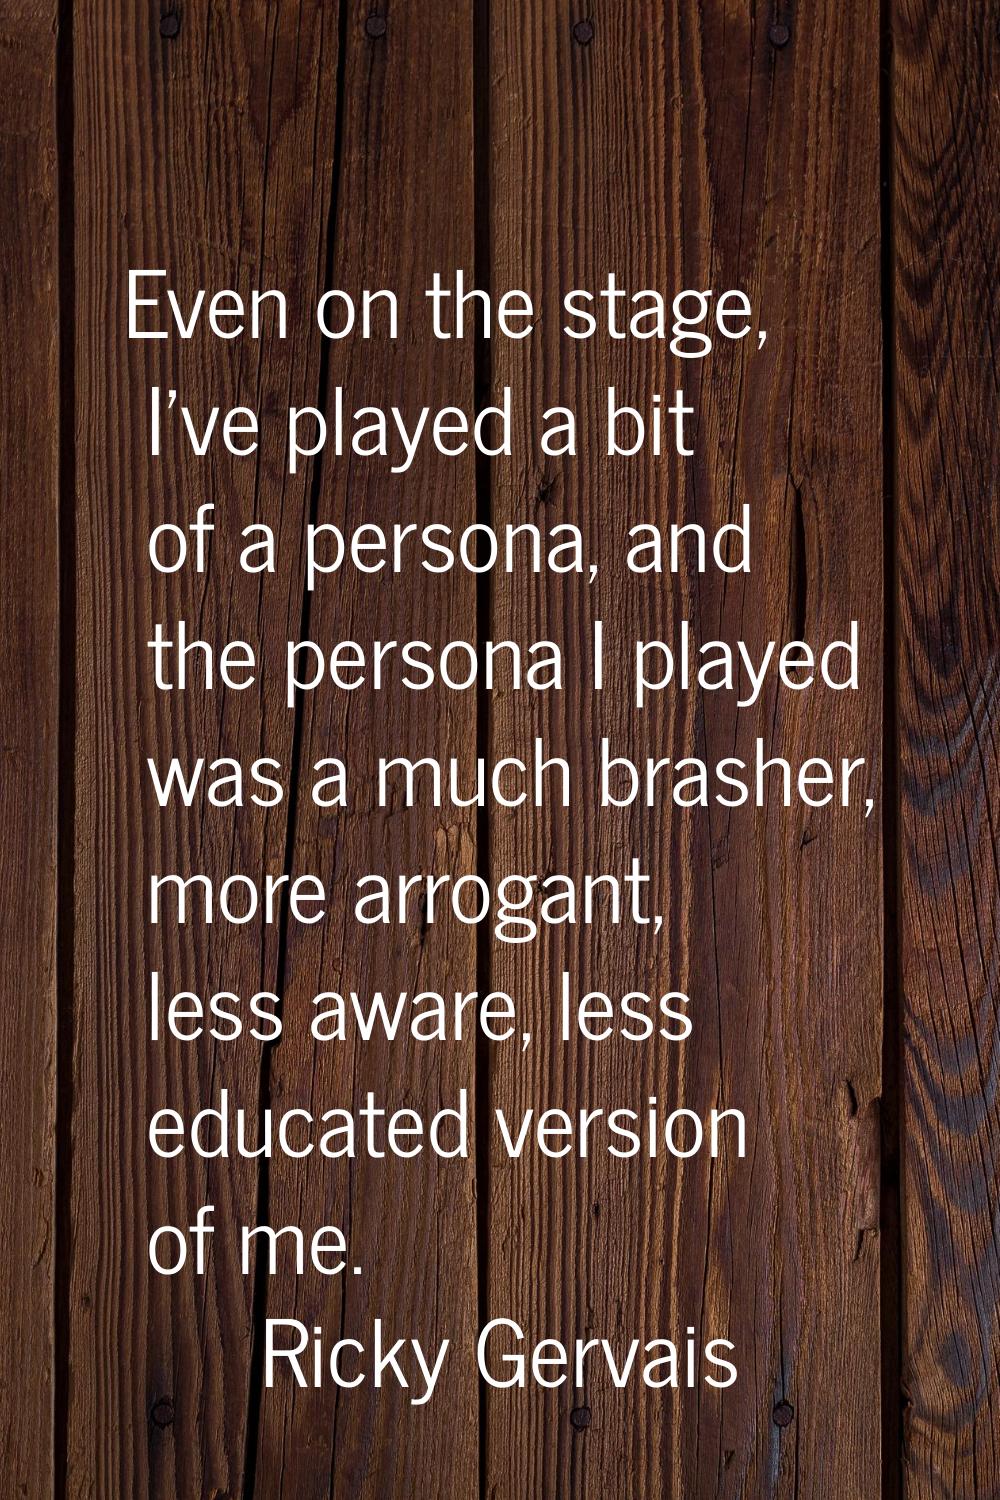 Even on the stage, I've played a bit of a persona, and the persona I played was a much brasher, mor